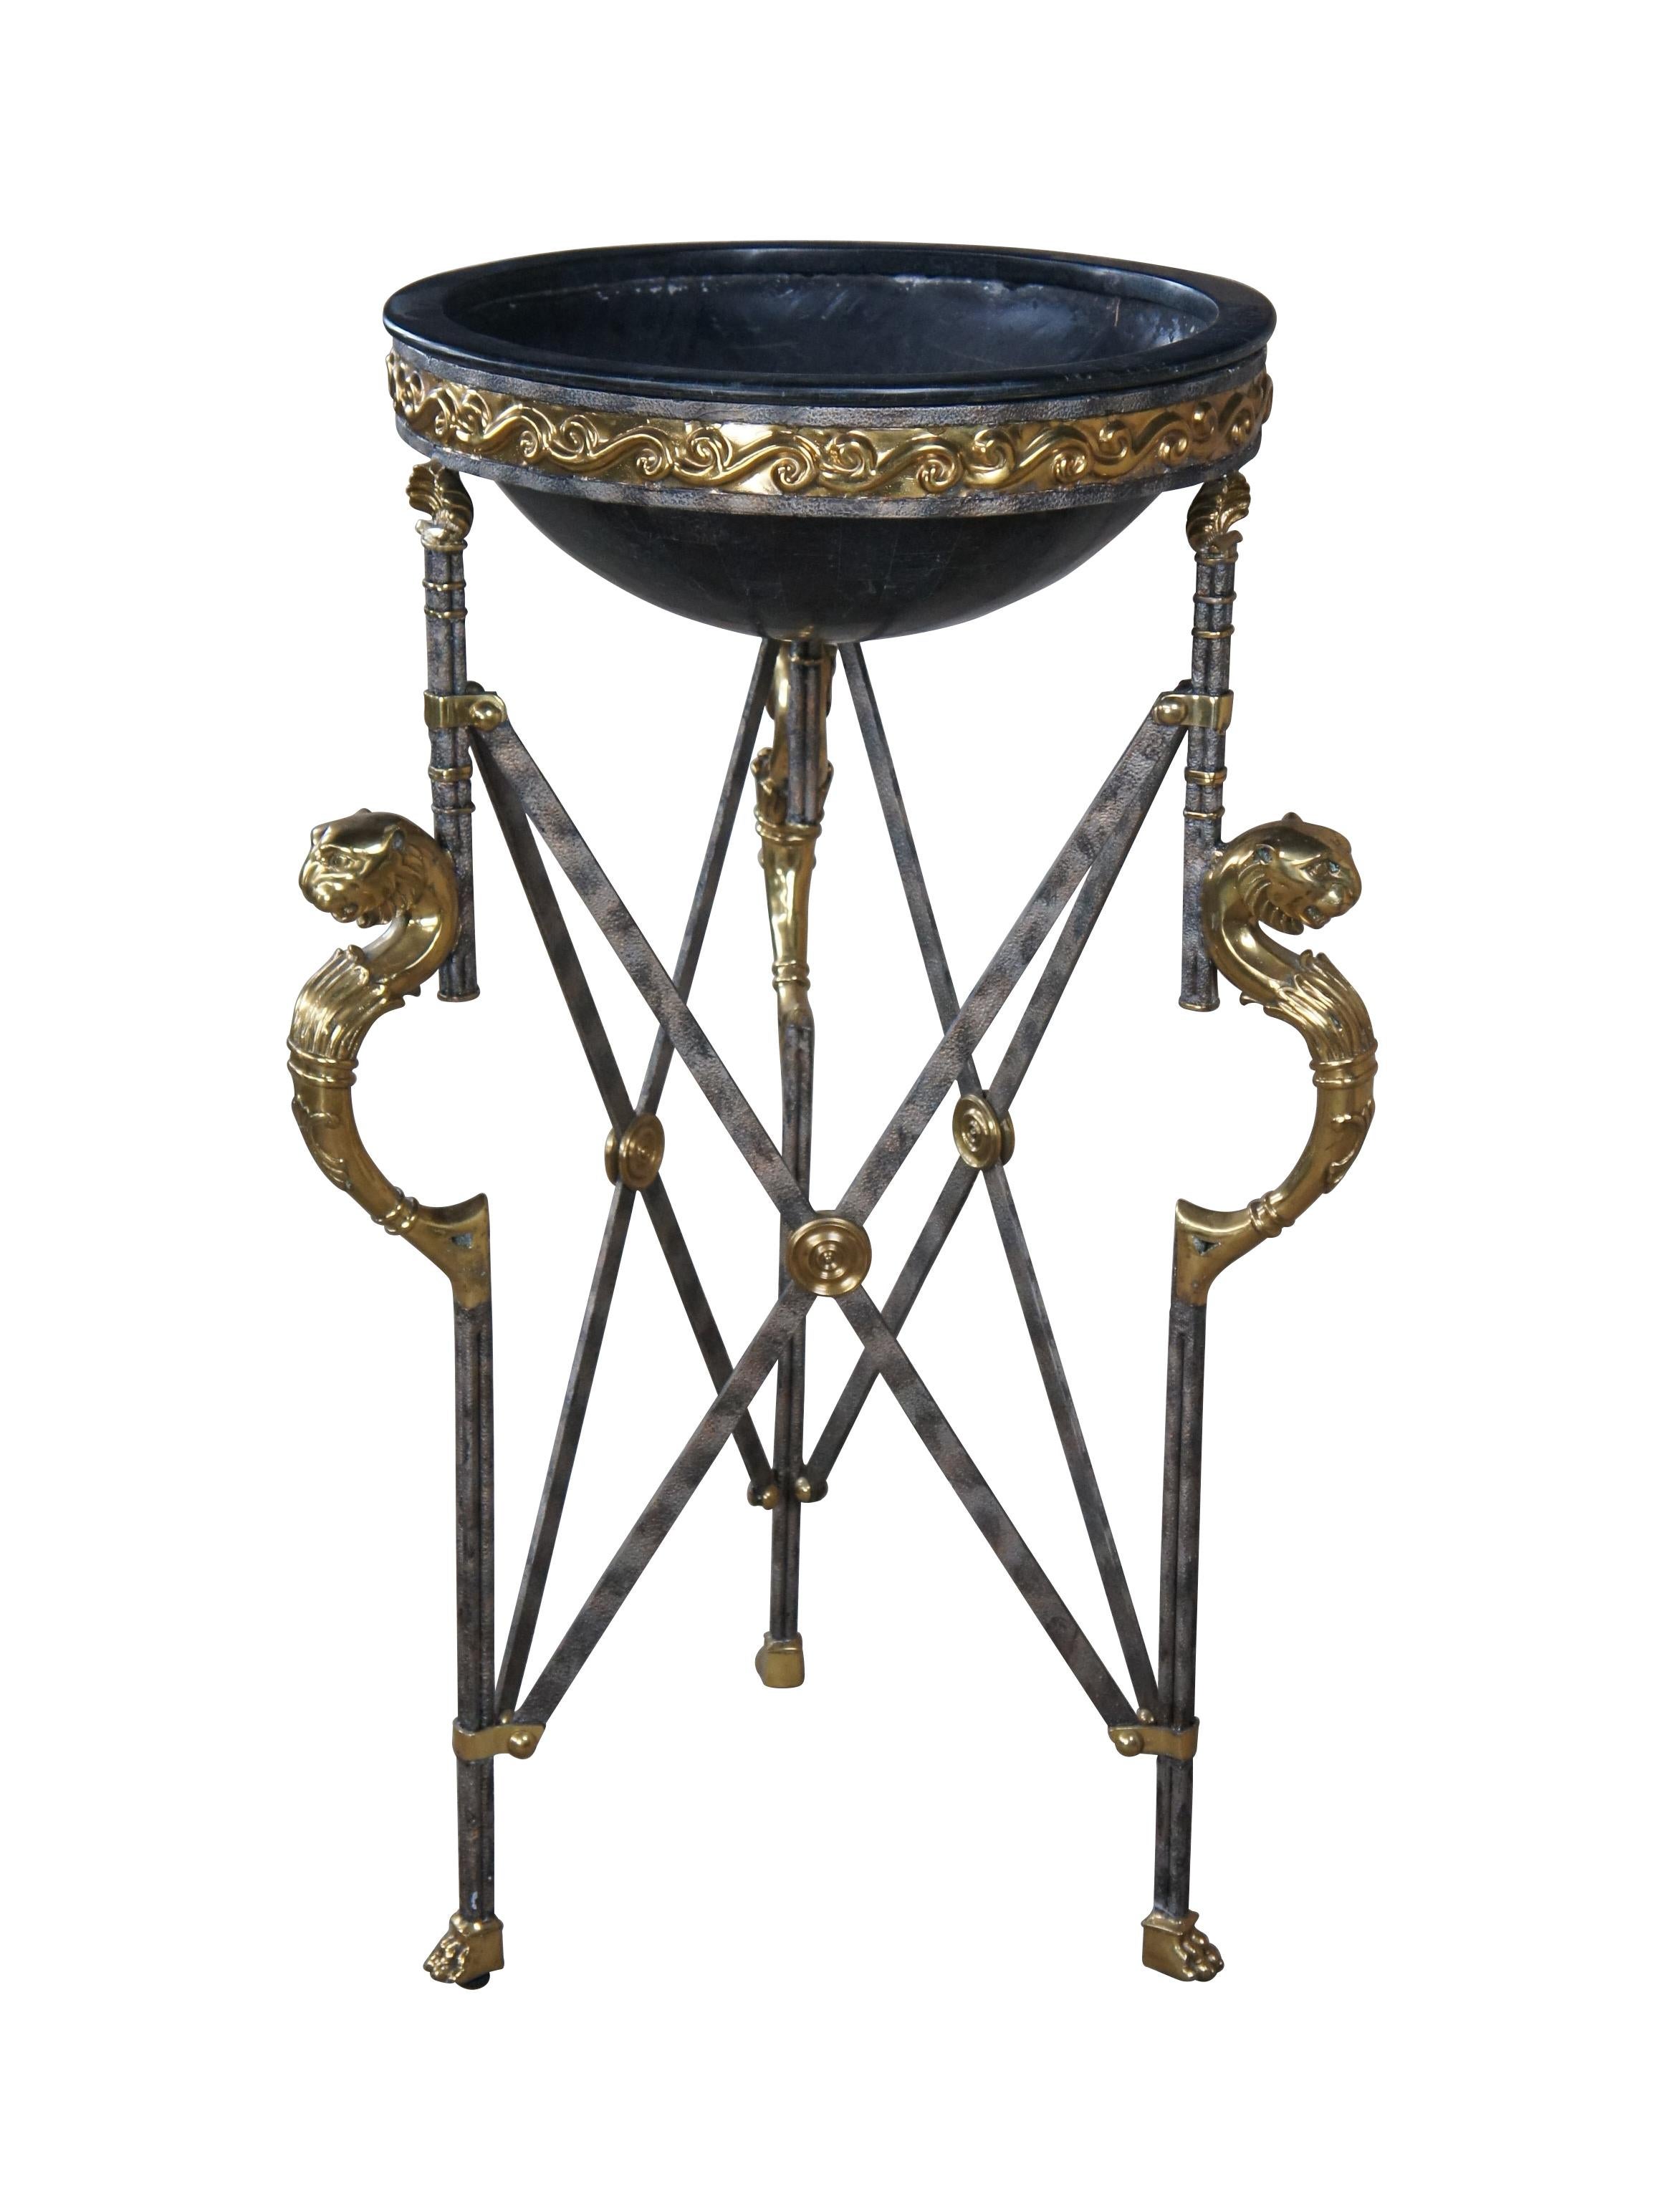 An impressive cauldron or planter by Maitland-Smith, circa 1990s.  Made from iron and bronze in Neoclassical, French Empire and Egyptian styling.  Features an iron tripod base connected by X form stretchers with bronze accents.  Each leg has an